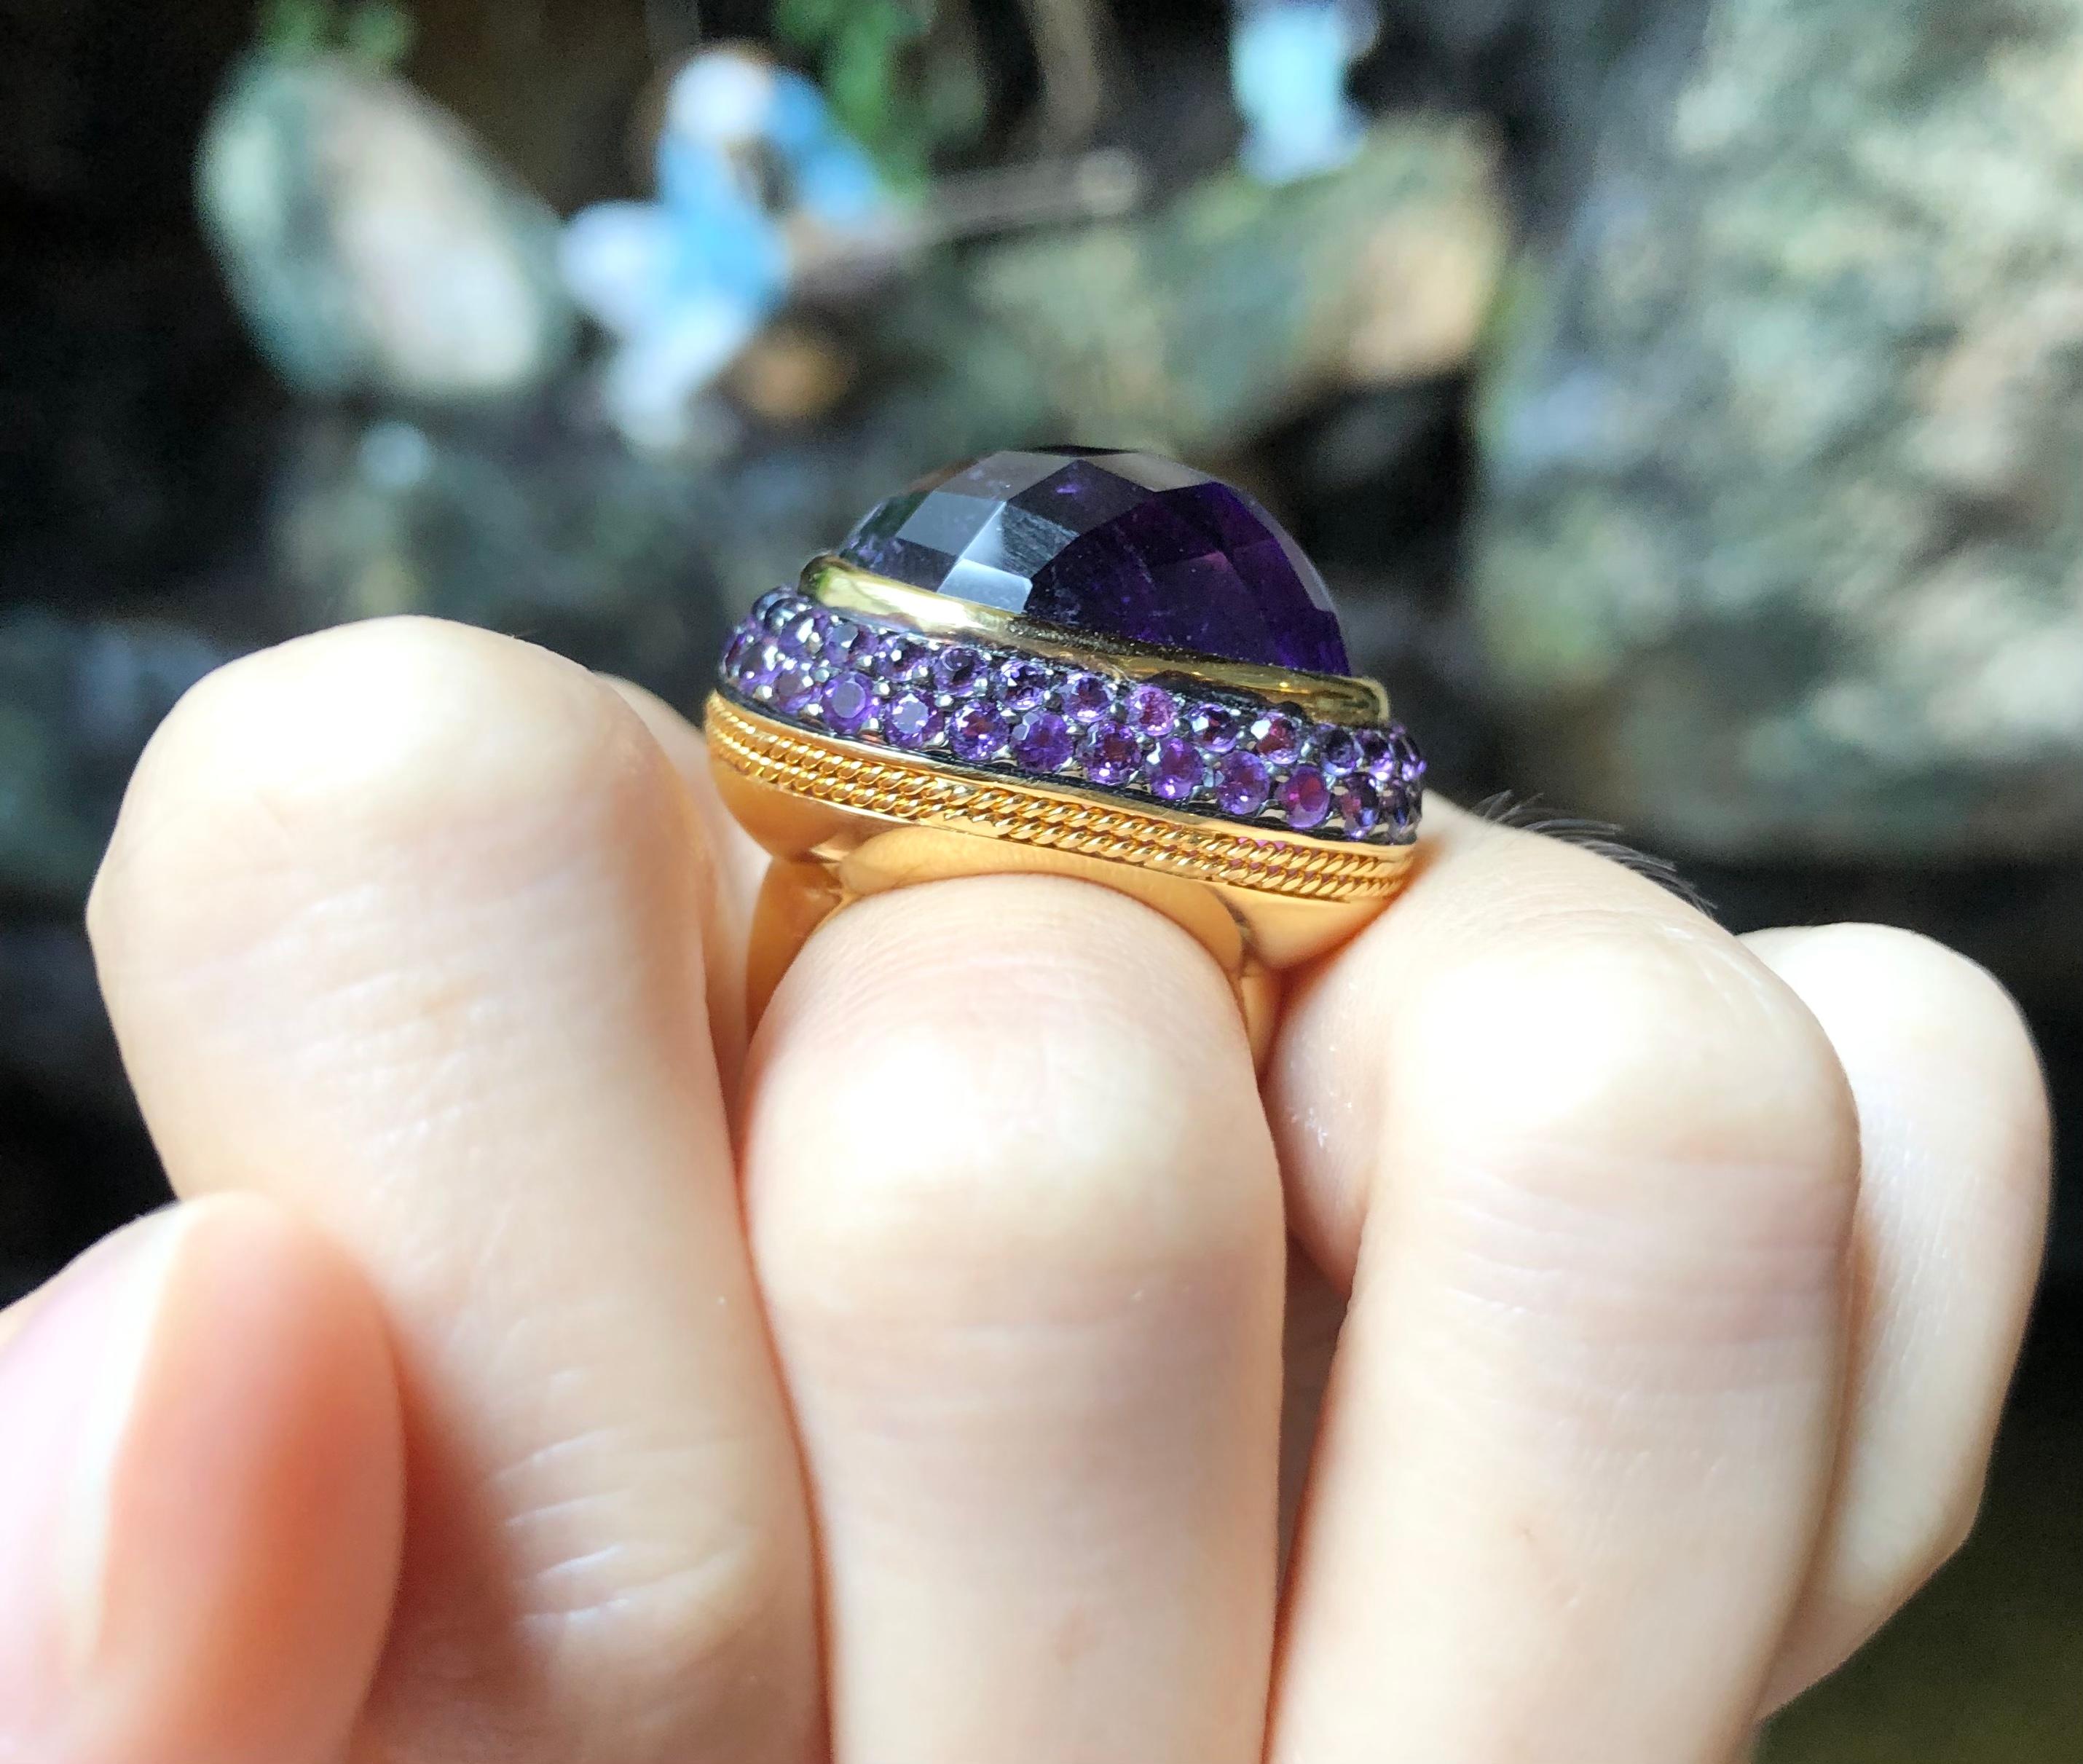 Cabochon Amethyst 21.61 carats with Amethyst 2.15 carats Ring set in 18 Karat Gold Settings

Width:  2.6 cm 
Length: 2.1 cm
Ring Size: 54
Total Weight: 18.38 grams

